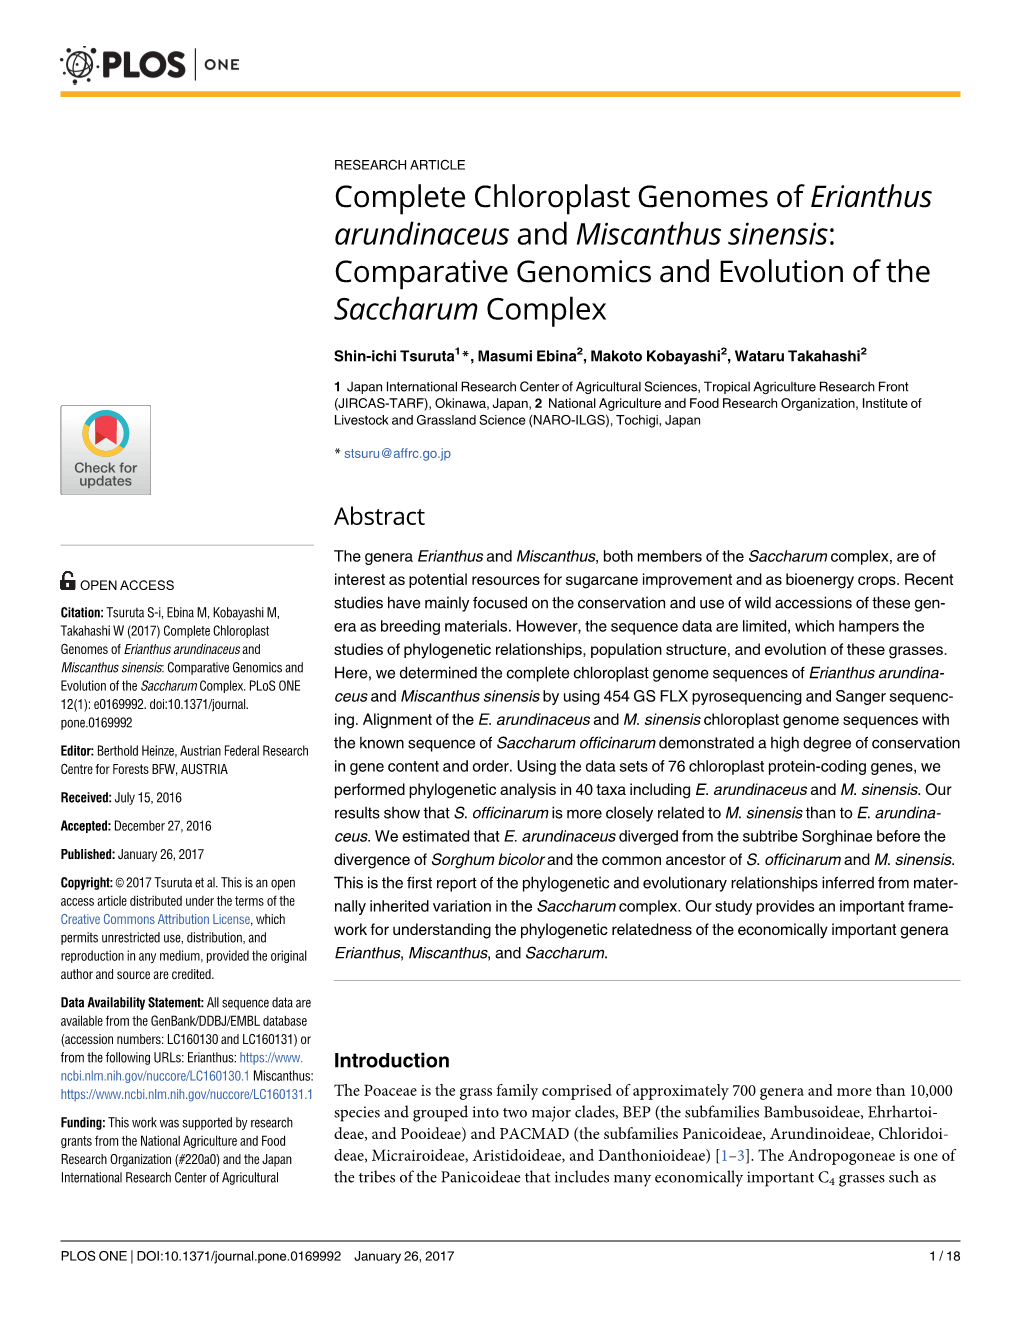 Complete Chloroplast Genomes of Erianthus Arundinaceus and Miscanthus Sinensis: Comparative Genomics and Evolution of the Saccharum Complex